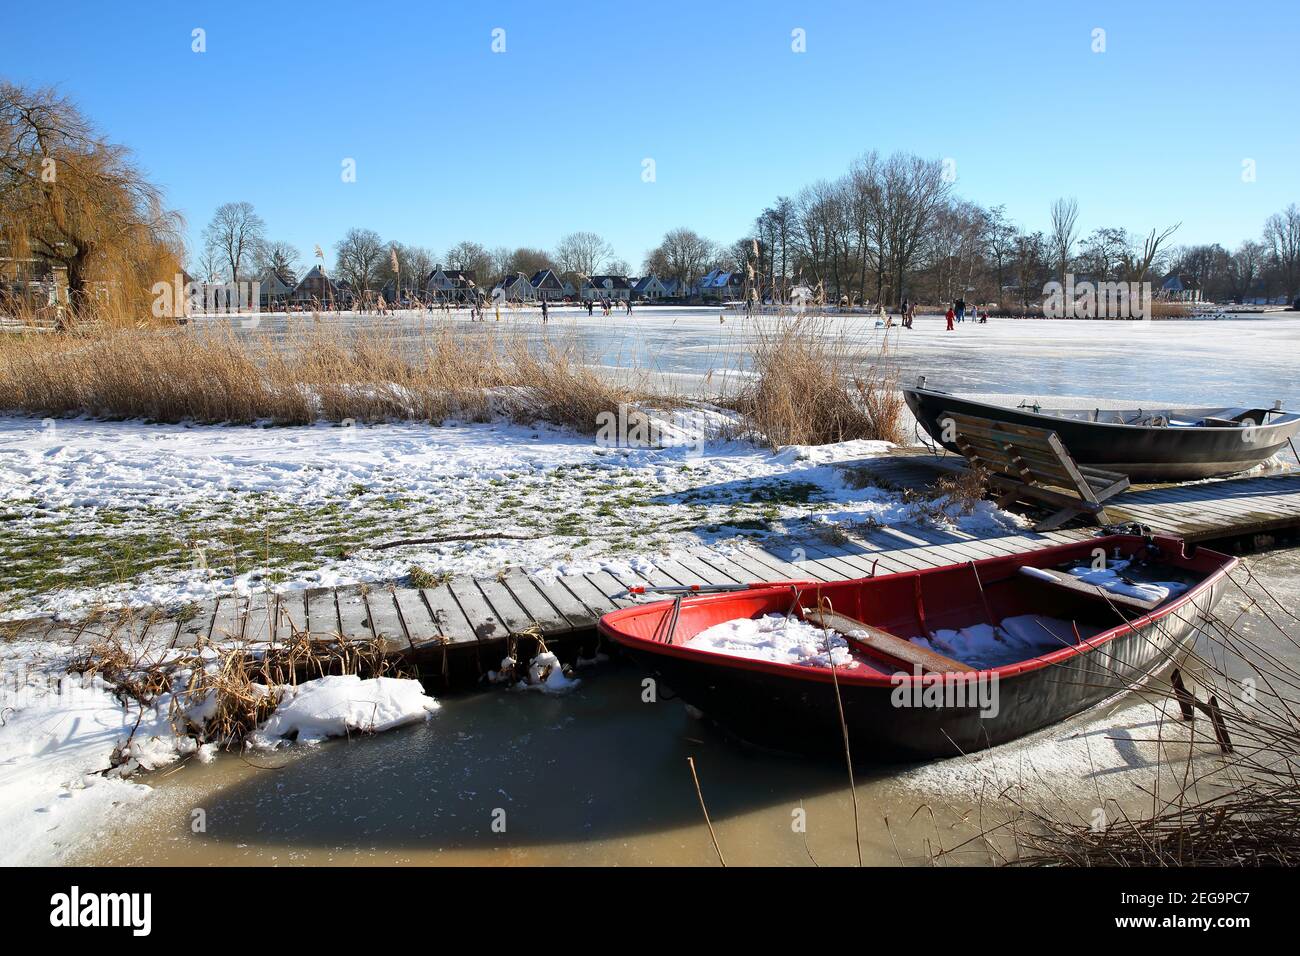 Winter snow and people ice skating on frozen water in Broek in Waterland, a  small town with old and painted wooden houses, North Holland,Netherlands  Stock Photo - Alamy